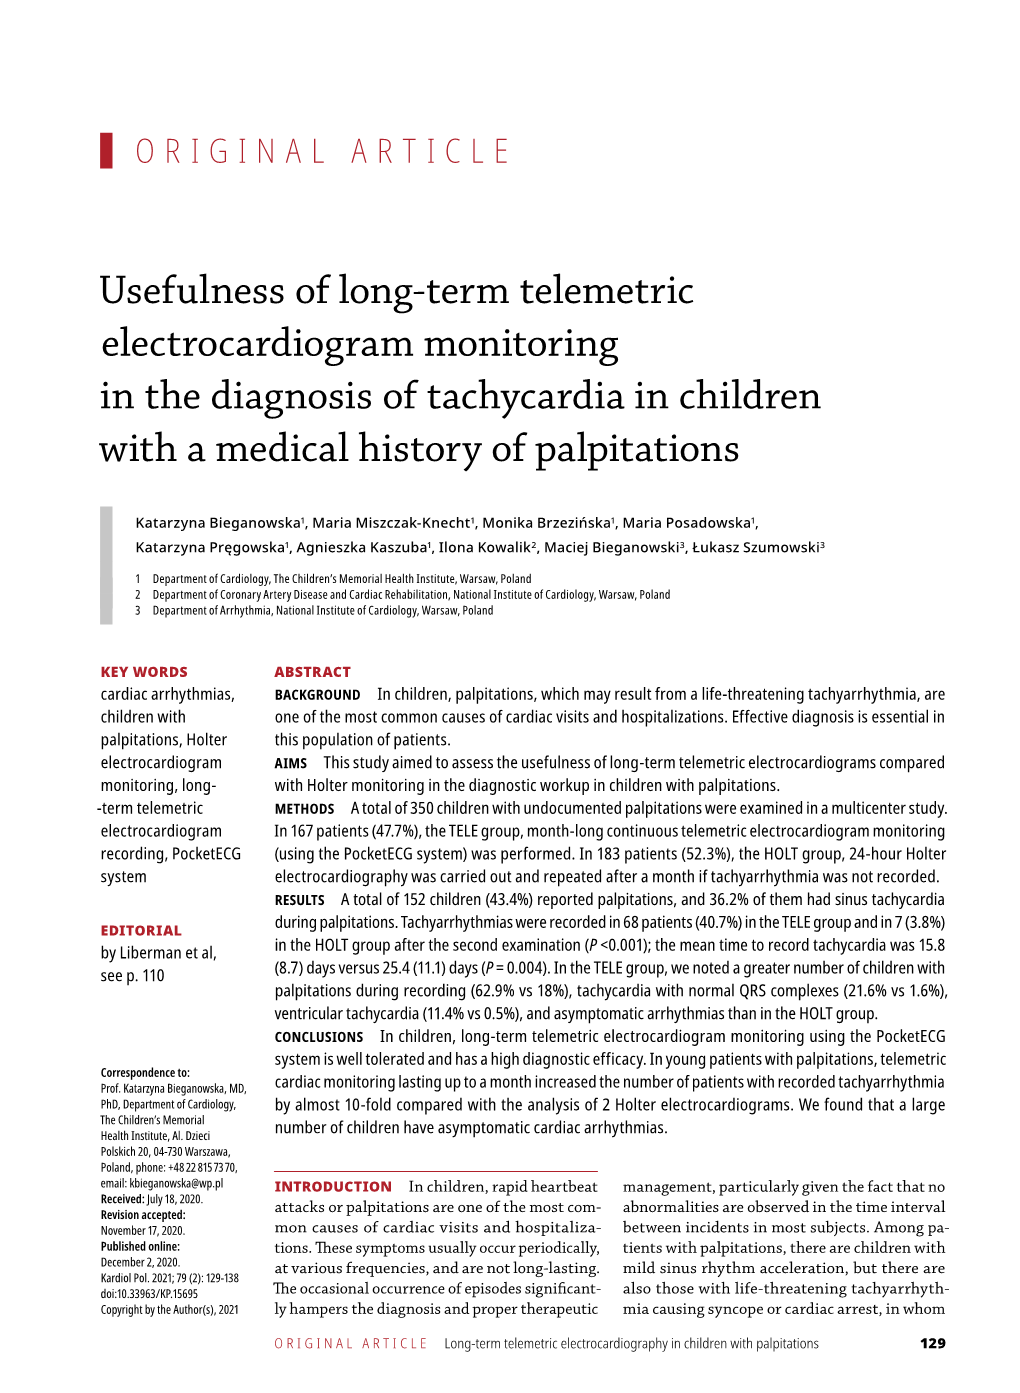 Term Telemetric Electrocardiogram Monitoring in the Diagnosis of Tachycardia in Children with a Medical History of Palpitations